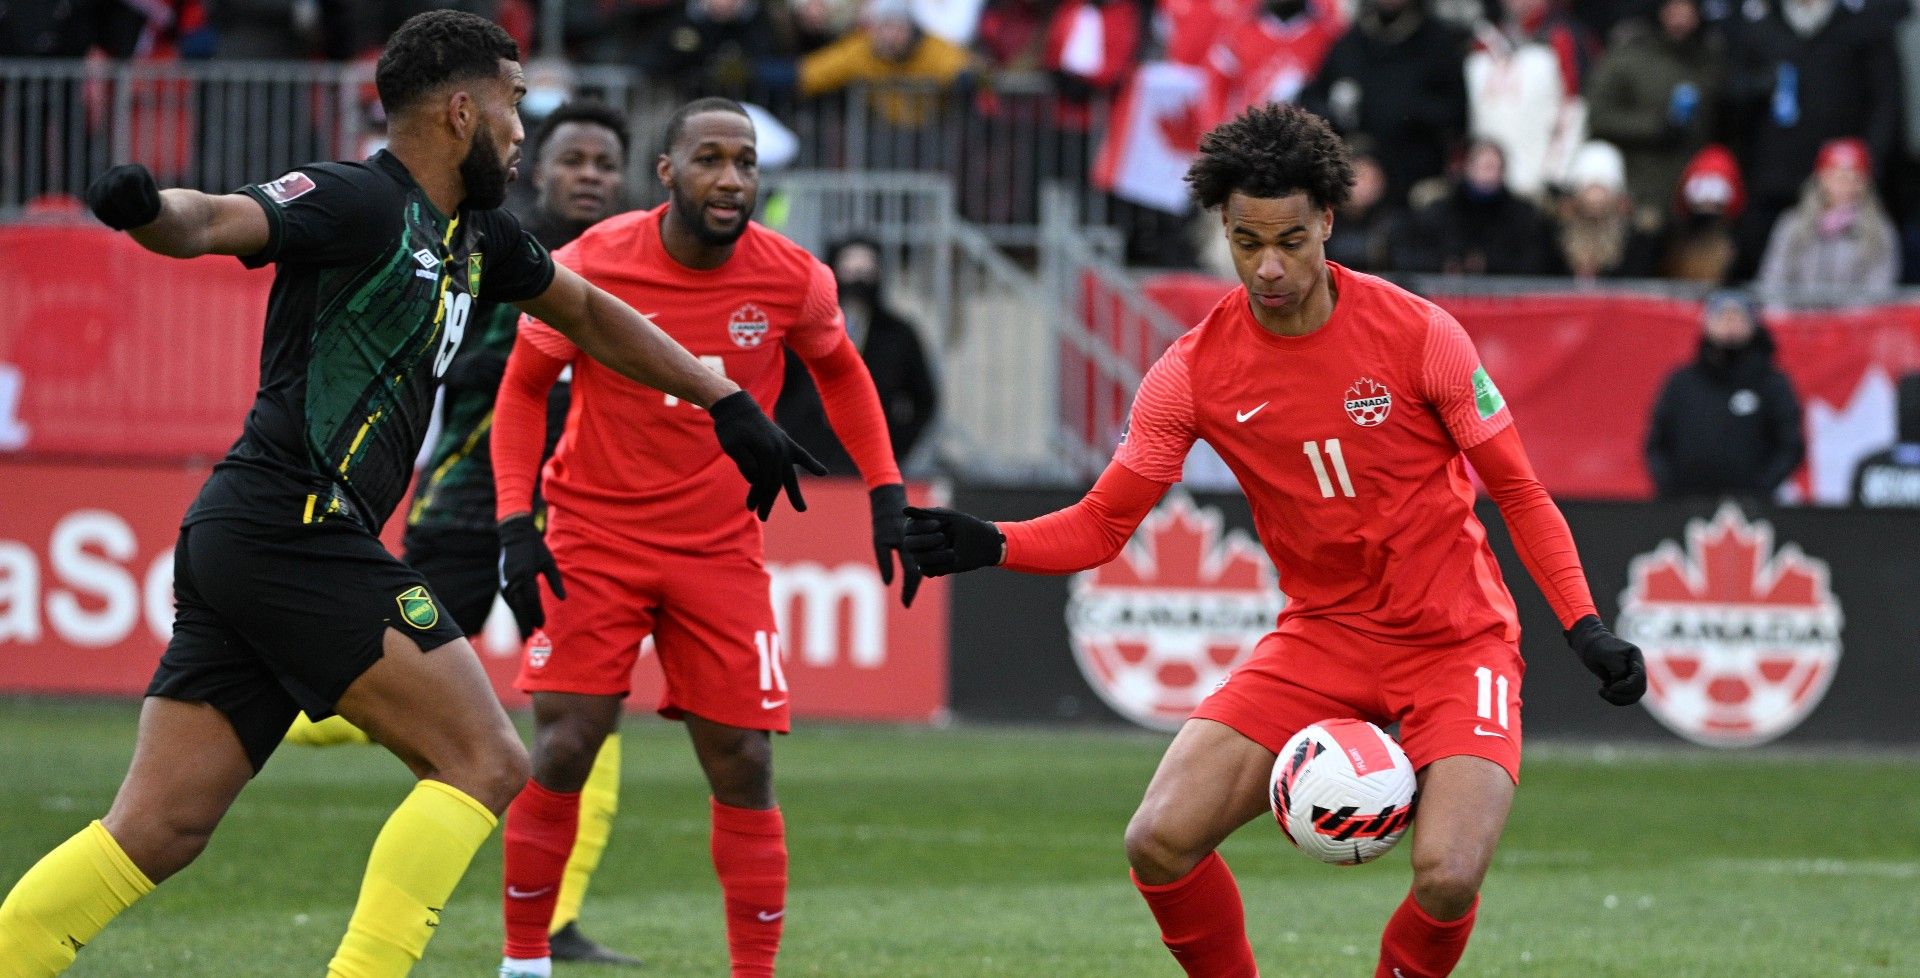 CanMNT Talk: Canada to face Iran in Vancouver friendly